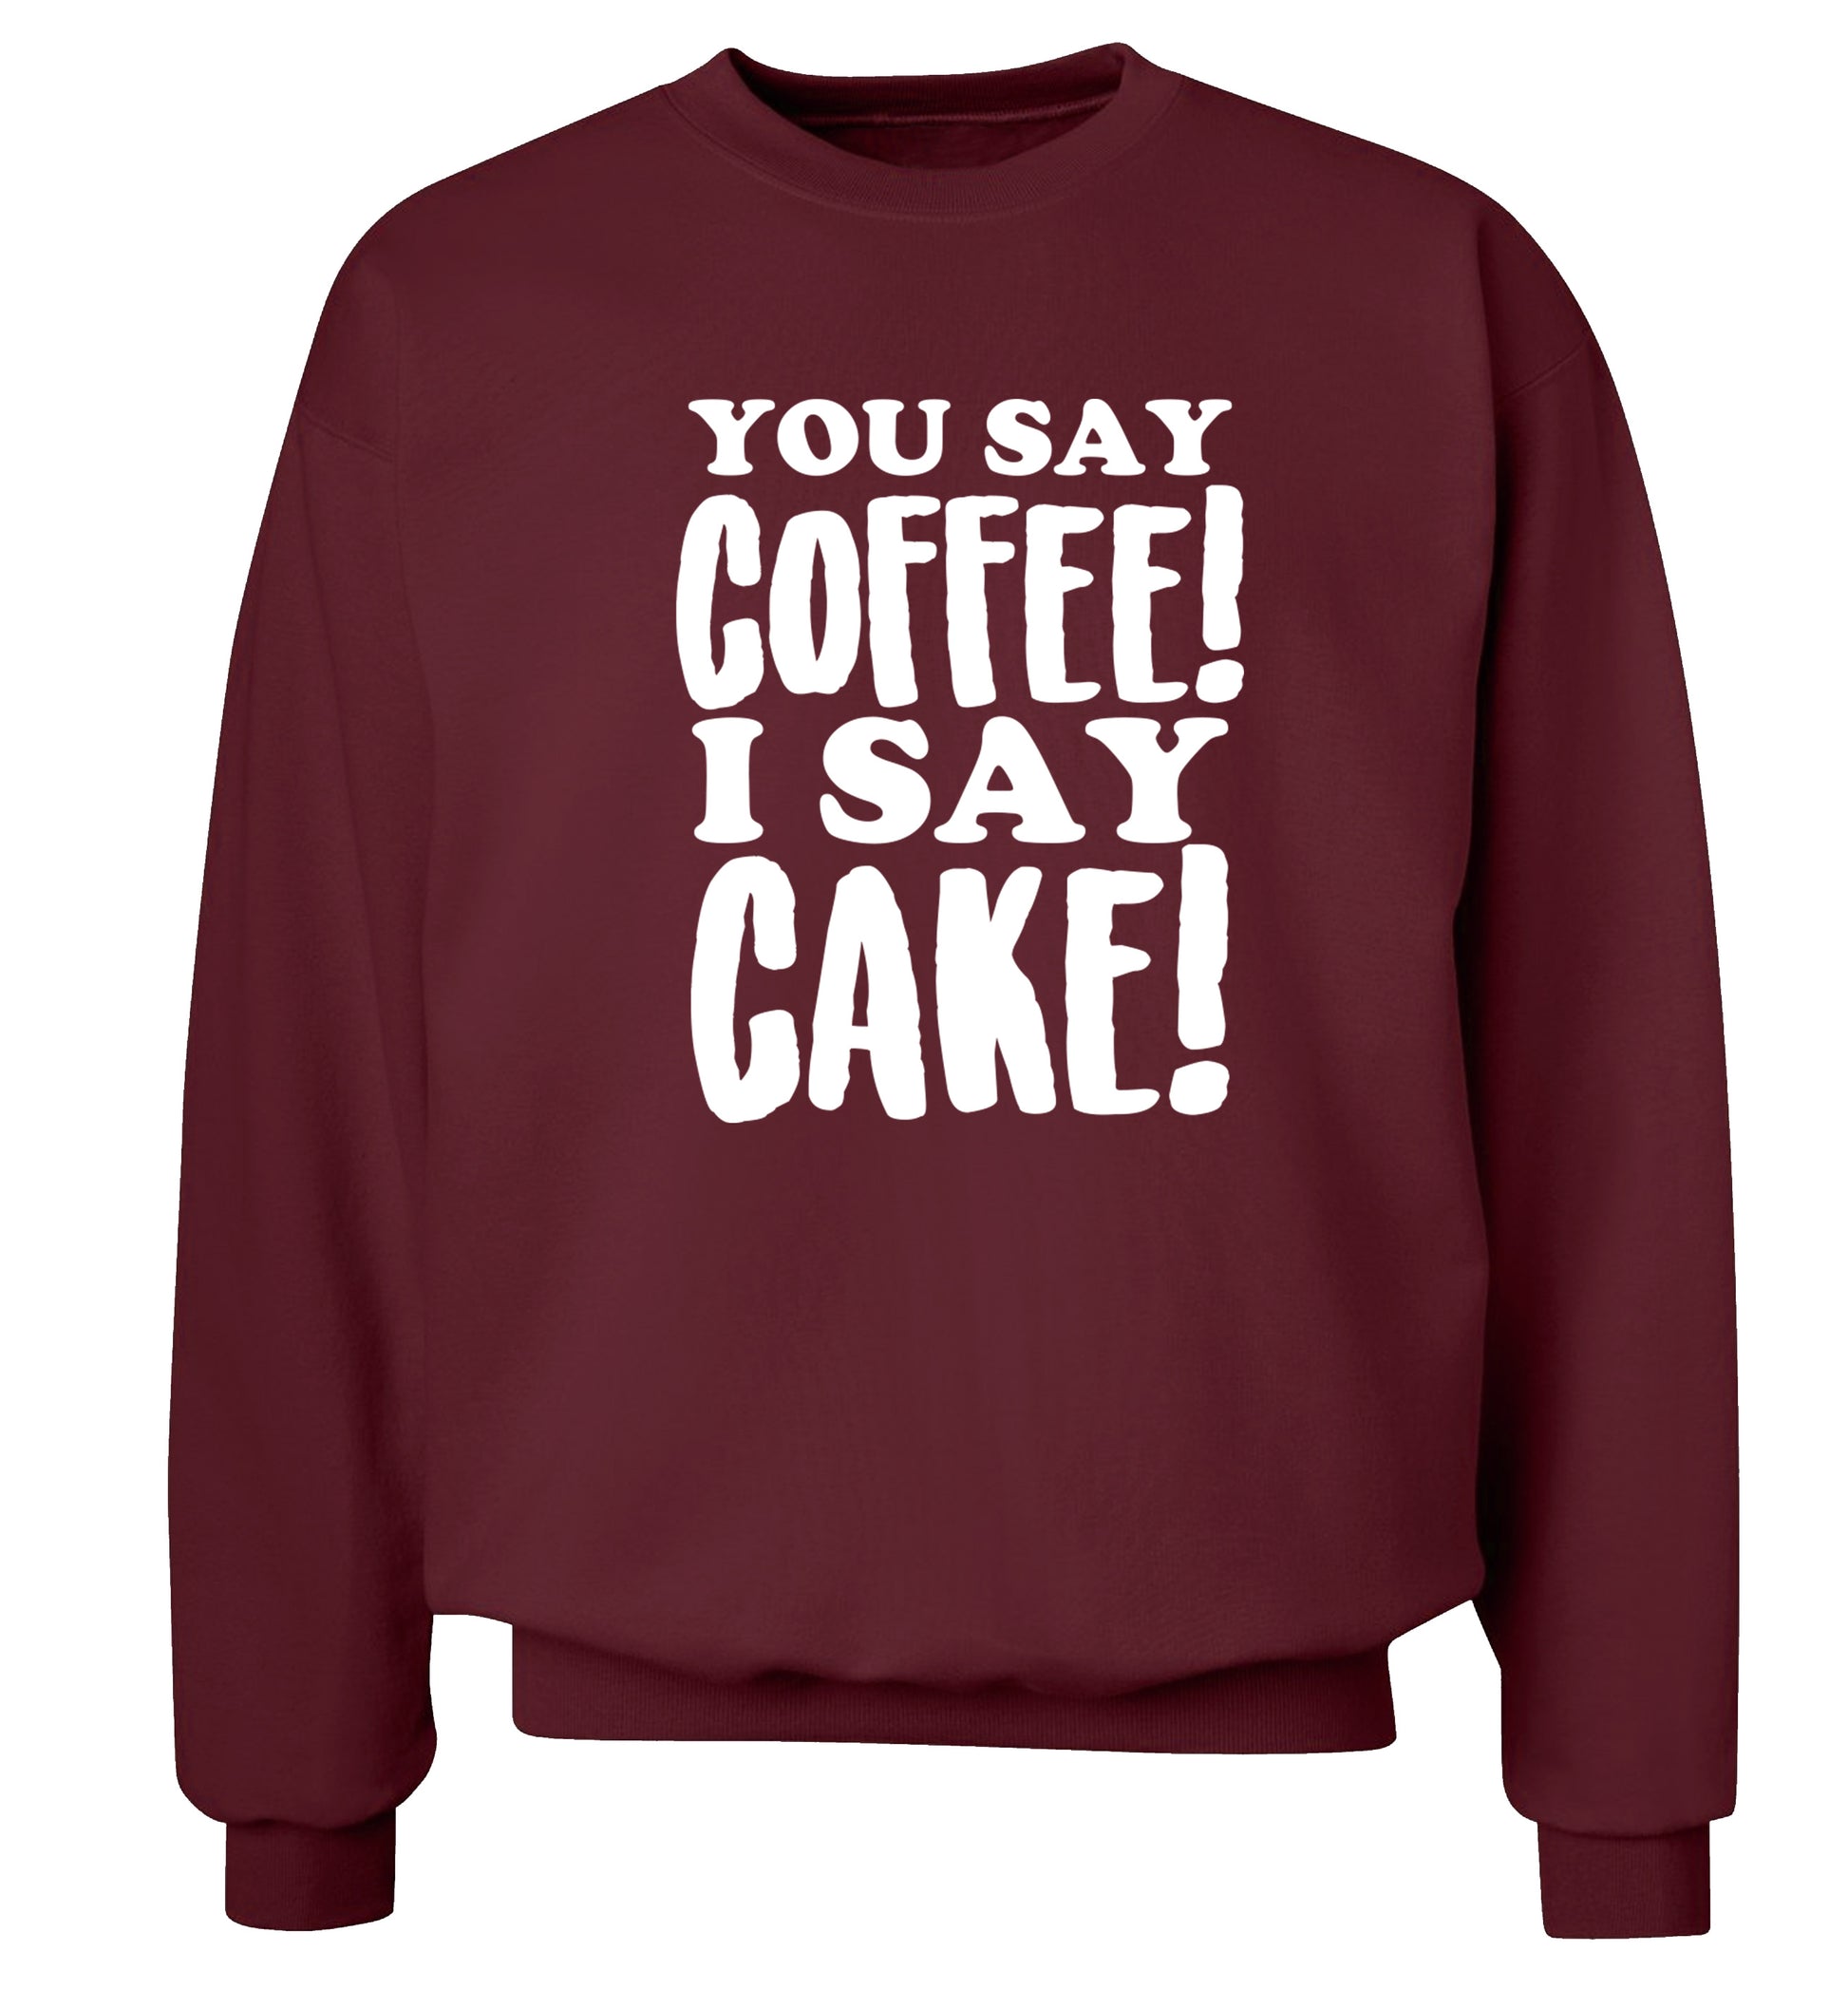 You say coffee I say cake! Adult's unisex maroon Sweater 2XL